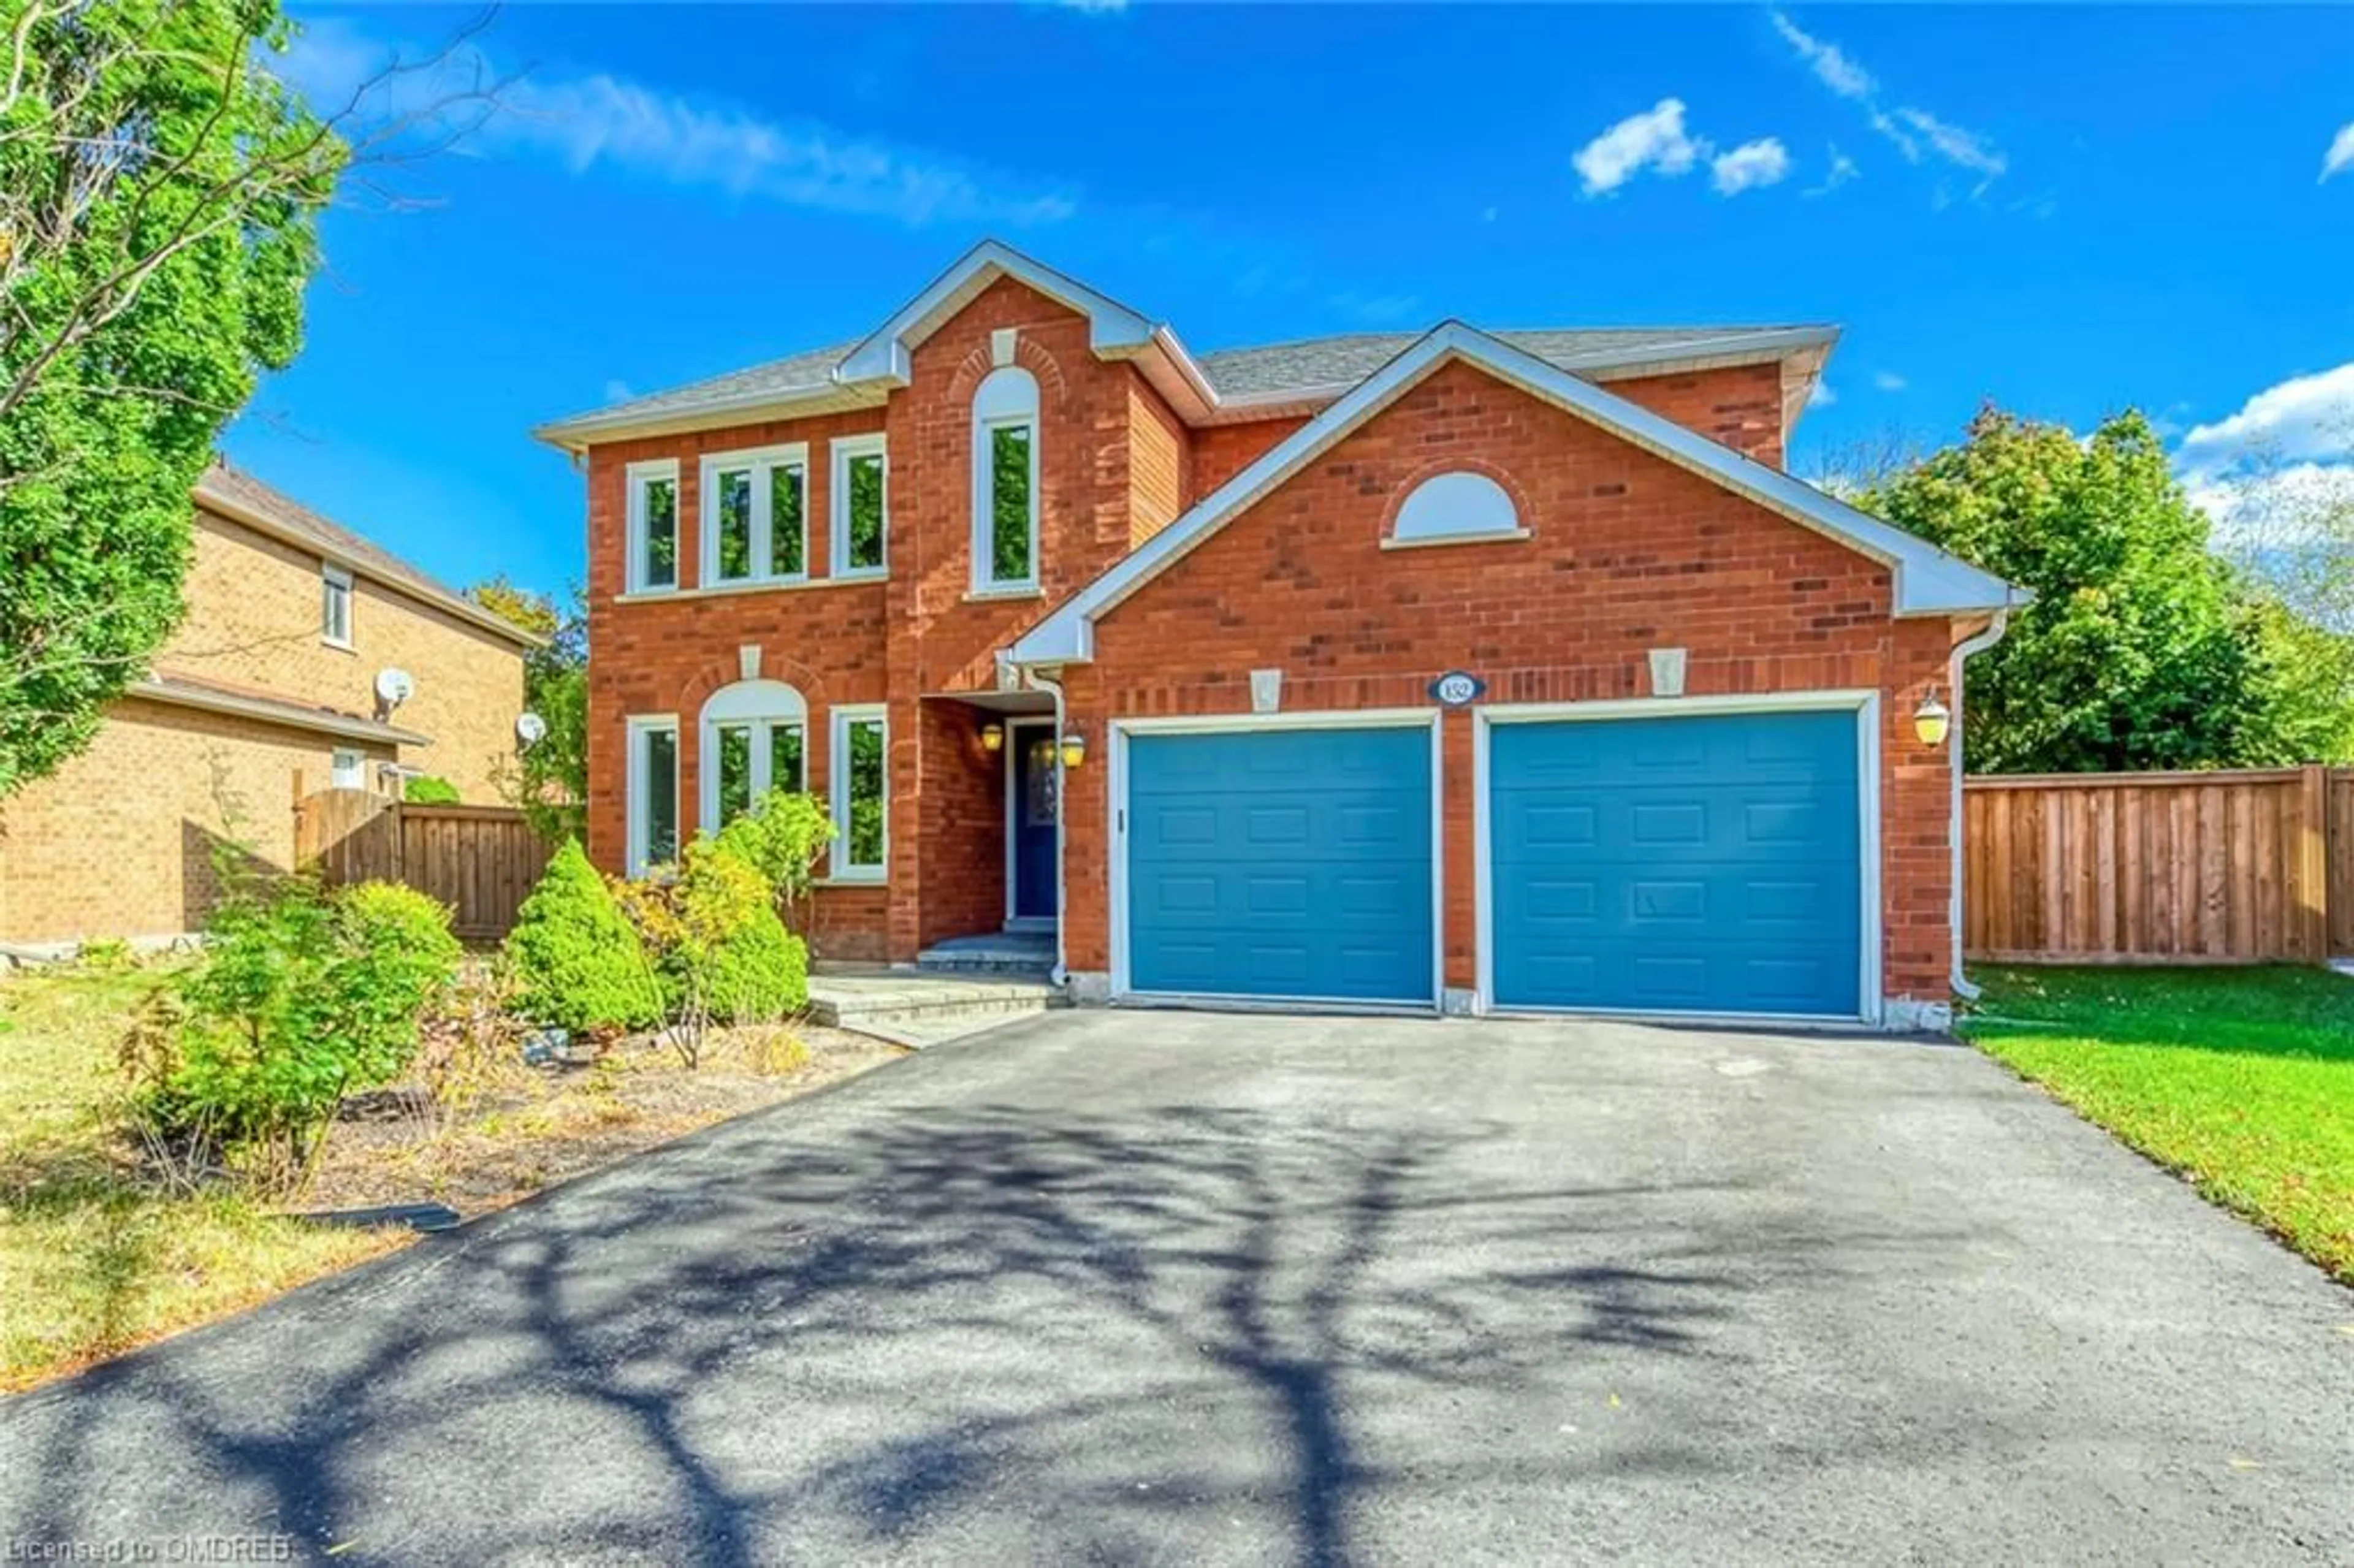 Home with brick exterior material for 152 Elderwood Trail, Oakville Ontario L6H 5W4